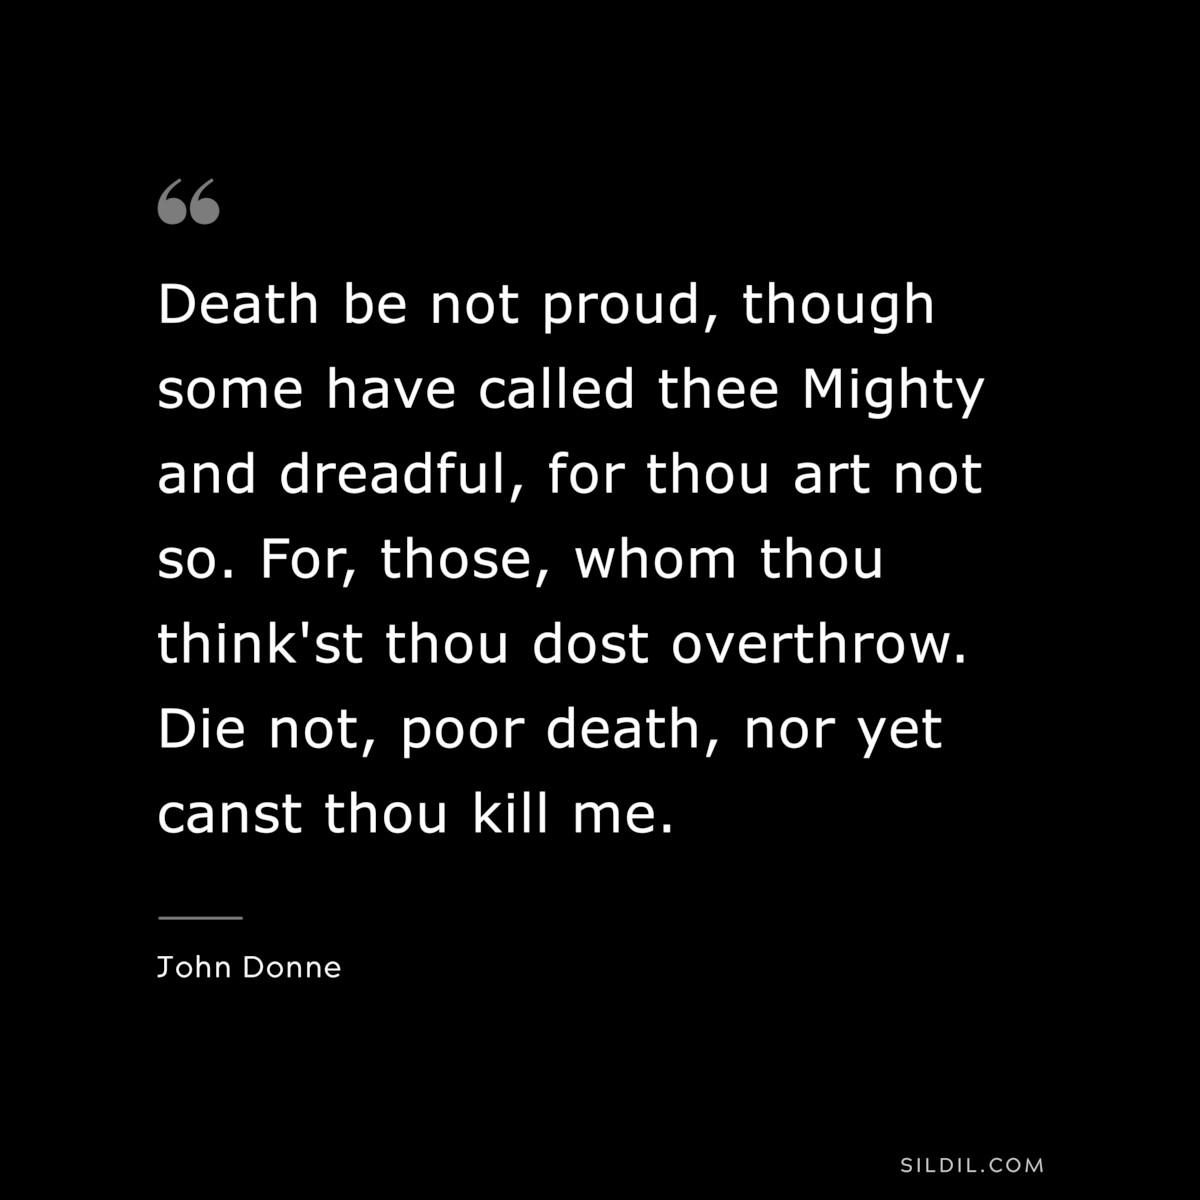 Death be not proud, though some have called thee Mighty and dreadful, for thou art not so. For, those, whom thou think'st thou dost overthrow. Die not, poor death, nor yet canst thou kill me. ― John Donne